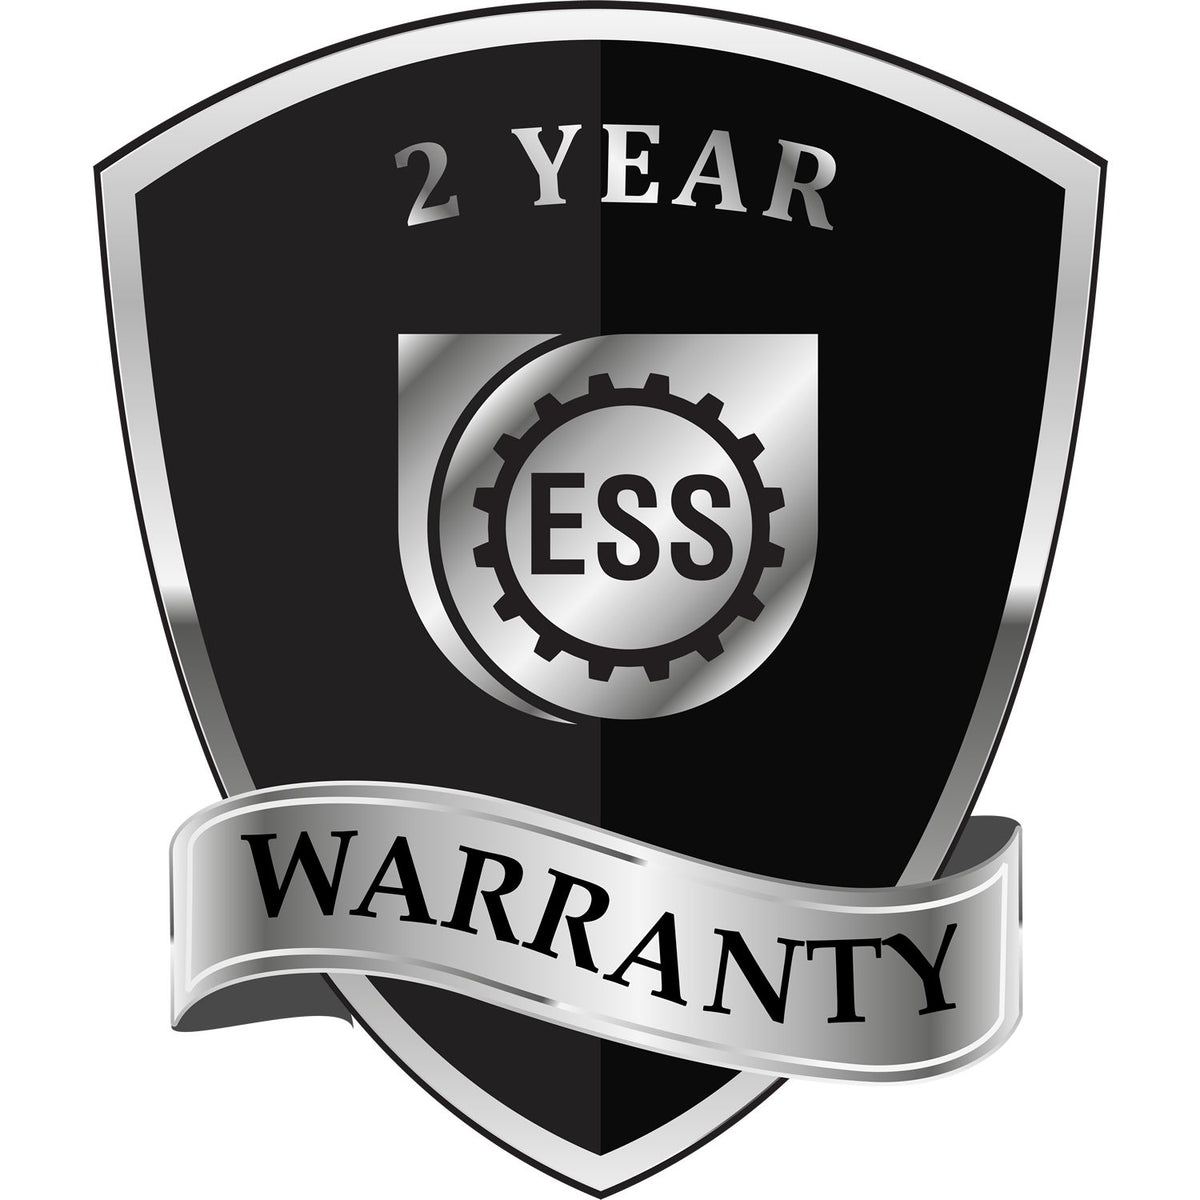 A black and silver badge or emblem showing warranty information for the Hybrid Illinois Geologist Seal